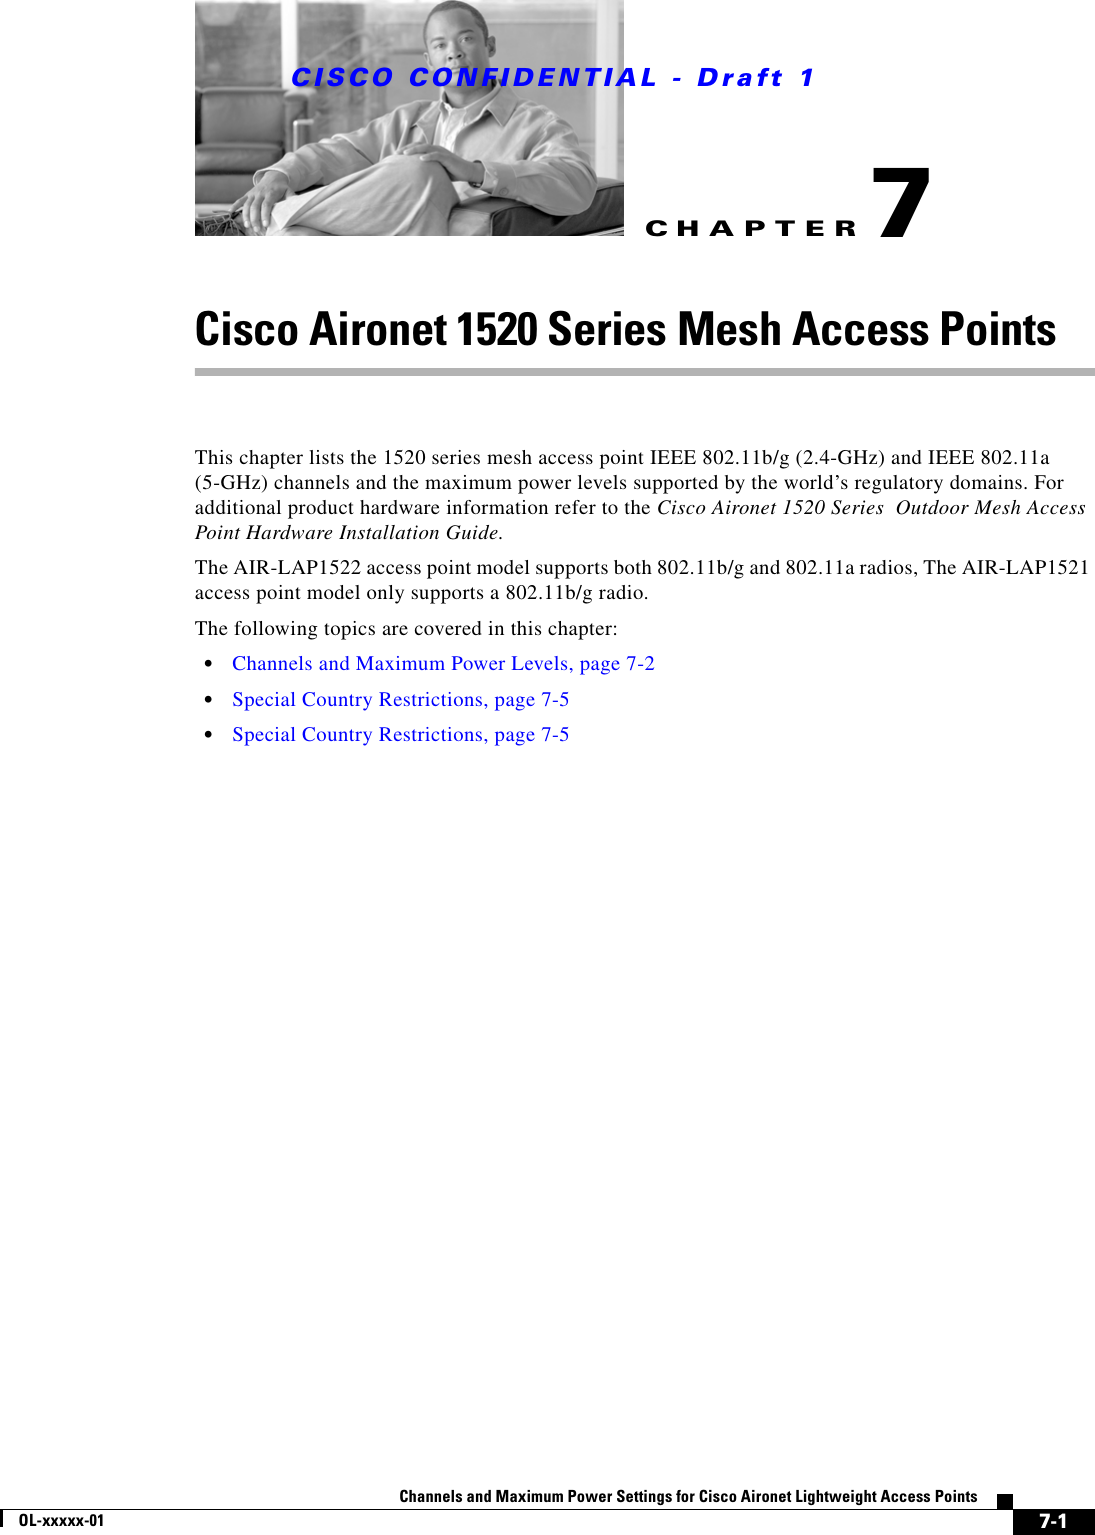 CHAPTER CISCO CONFIDENTIAL - Draft 17-1Channels and Maximum Power Settings for Cisco Aironet Lightweight Access PointsOL-xxxxx-017Cisco Aironet 1520 Series Mesh Access Points This chapter lists the 1520 series mesh access point IEEE 802.11b/g (2.4-GHz) and IEEE 802.11a (5-GHz) channels and the maximum power levels supported by the world’s regulatory domains. For additional product hardware information refer to the Cisco Aironet 1520 Series  Outdoor Mesh Access Point Hardware Installation Guide.The AIR-LAP1522 access point model supports both 802.11b/g and 802.11a radios, The AIR-LAP1521 access point model only supports a 802.11b/g radio.The following topics are covered in this chapter:•Channels and Maximum Power Levels, page 7-2•Special Country Restrictions, page 7-5•Special Country Restrictions, page 7-5